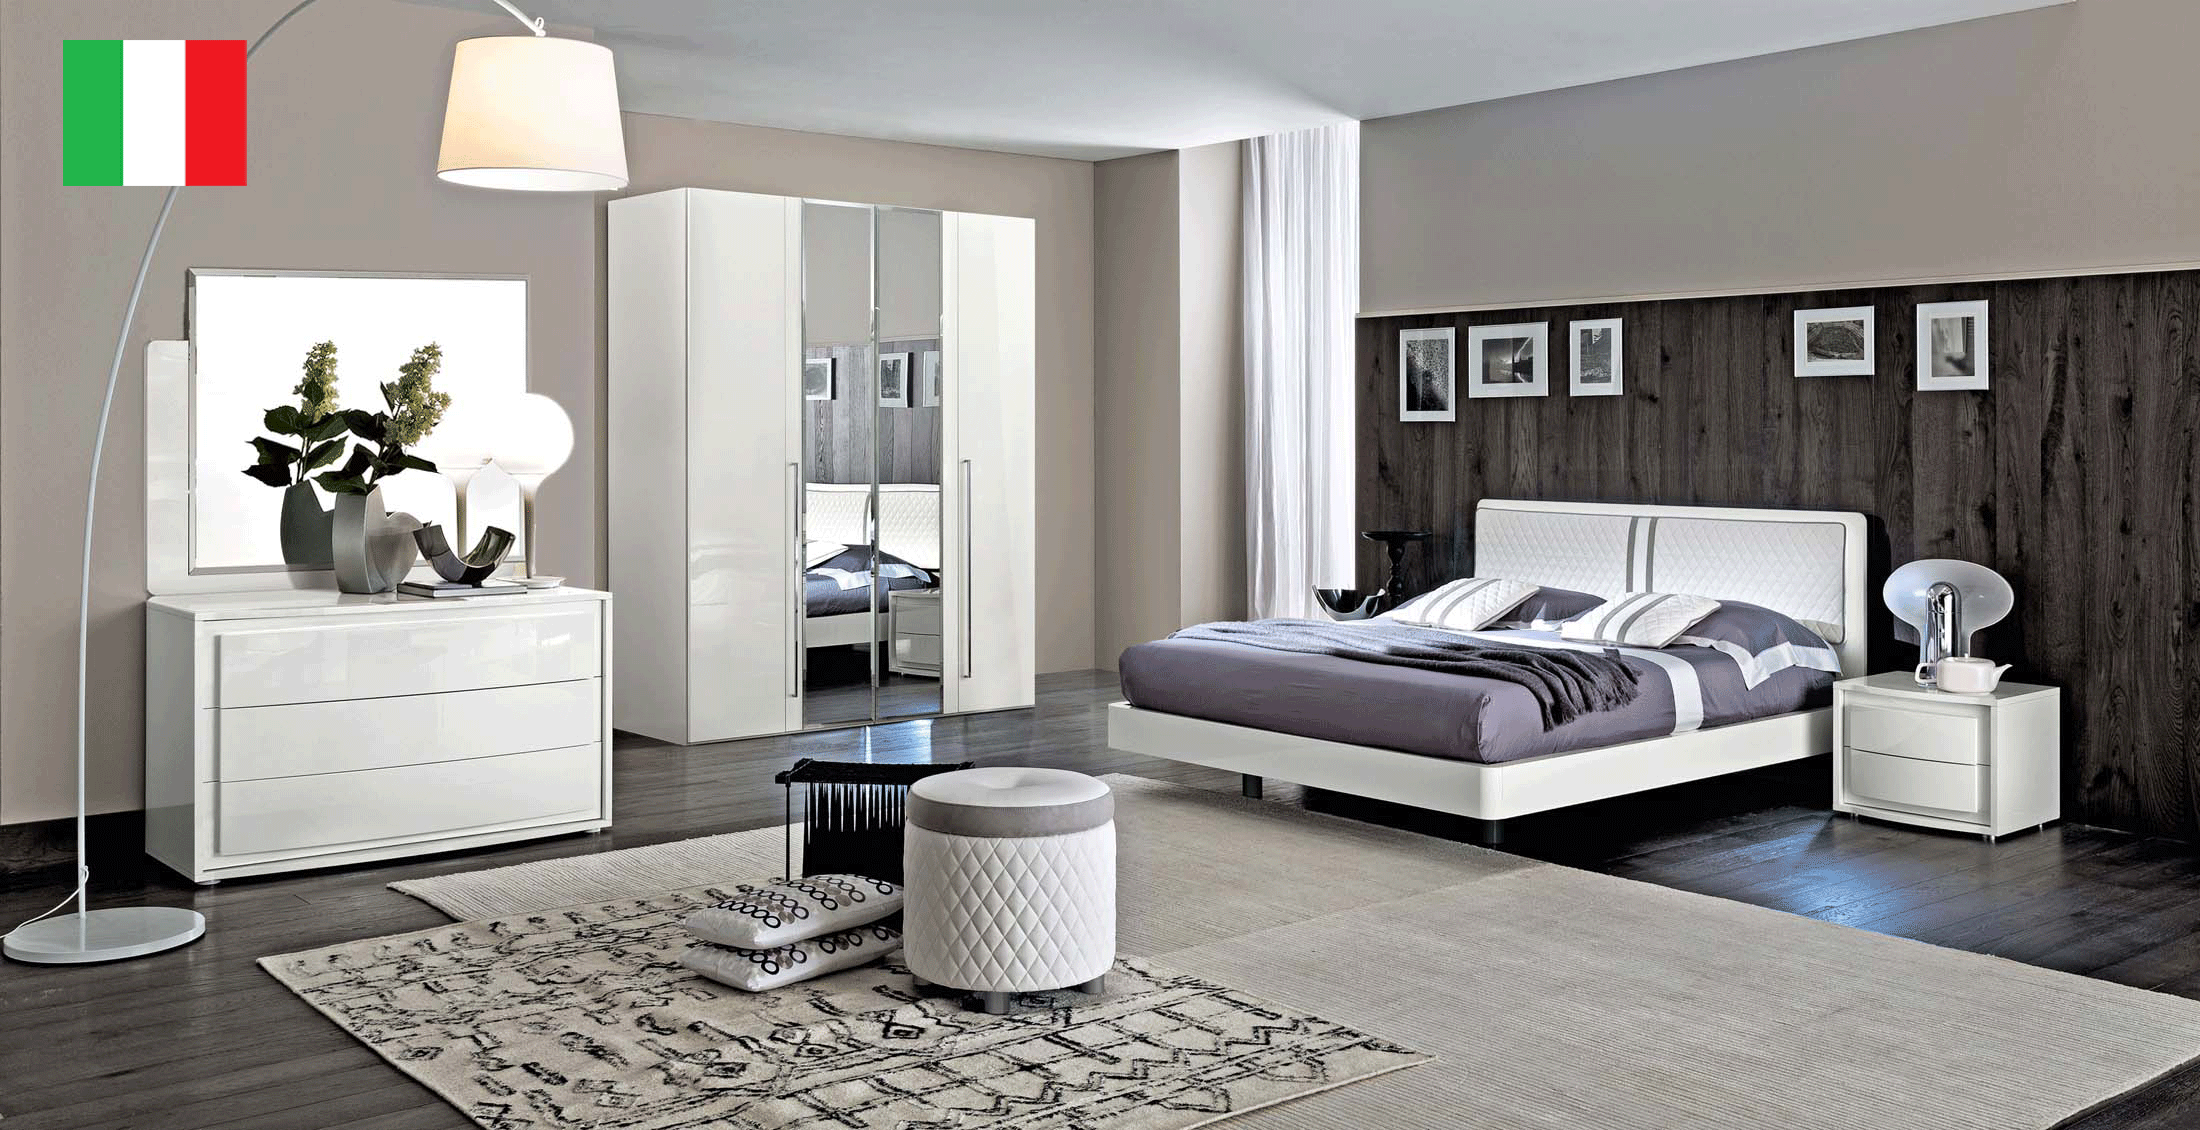 Bedroom Furniture Beds Dama Bianca Bedroom by CamelGroup Italy